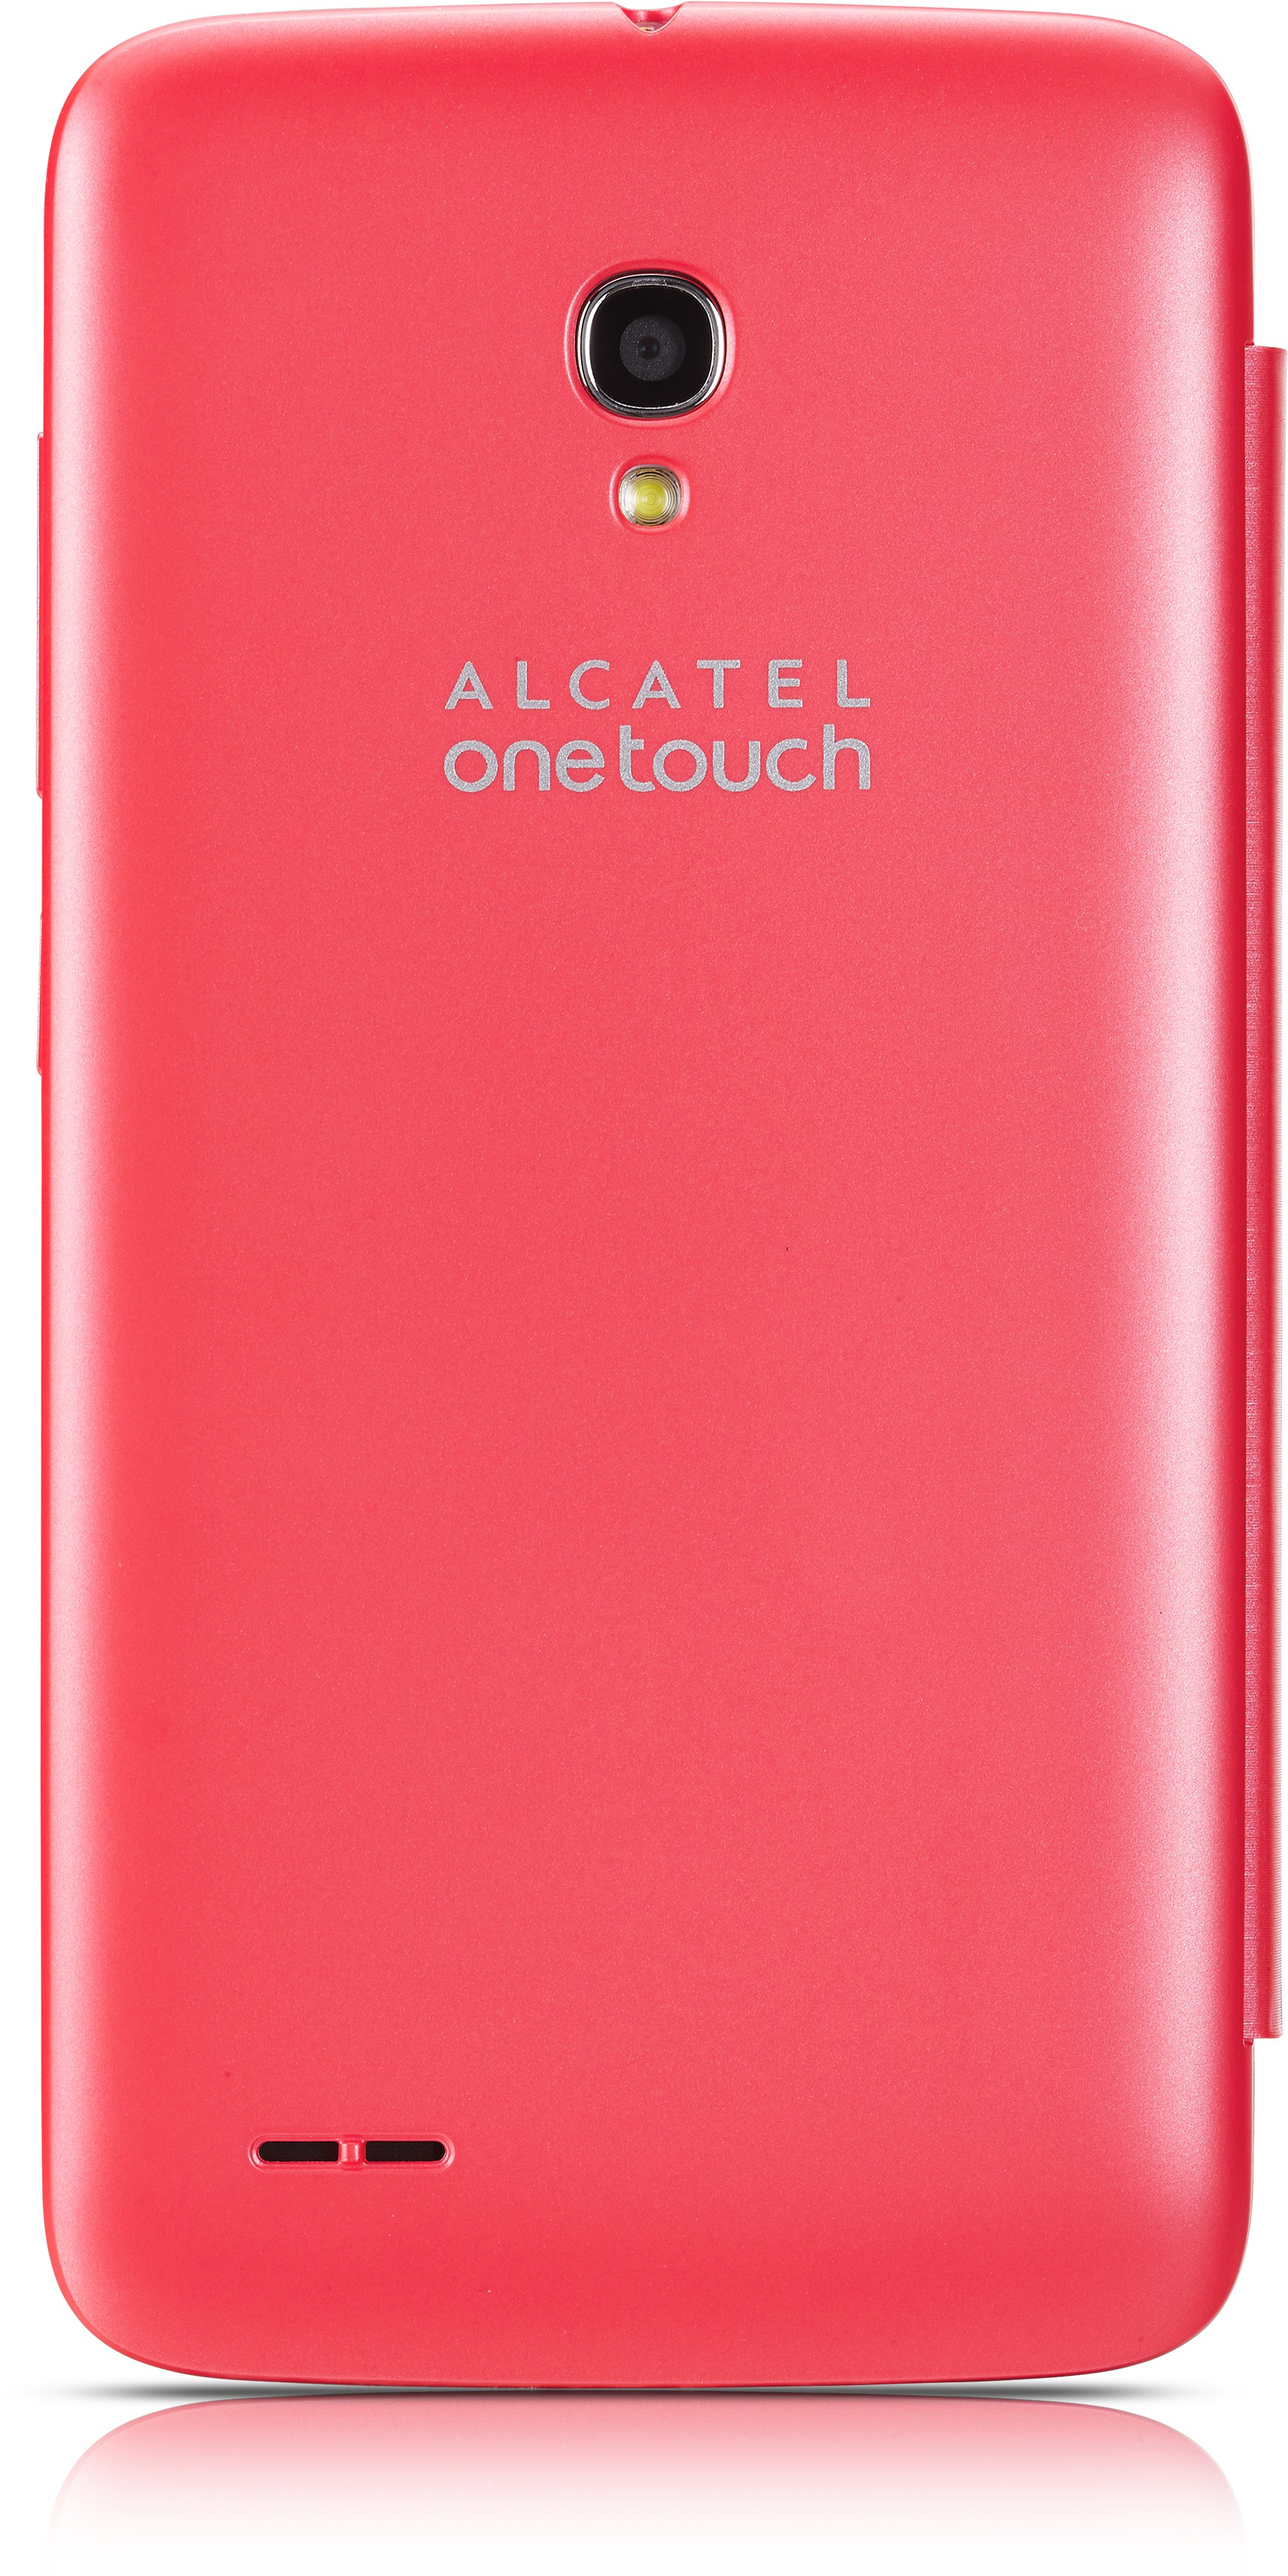 ALCATEL Flipcover für POP Pop Alcatel, FC5042 Onetouch ONETOUCH Flip Cover, Rot rot, 2, 2